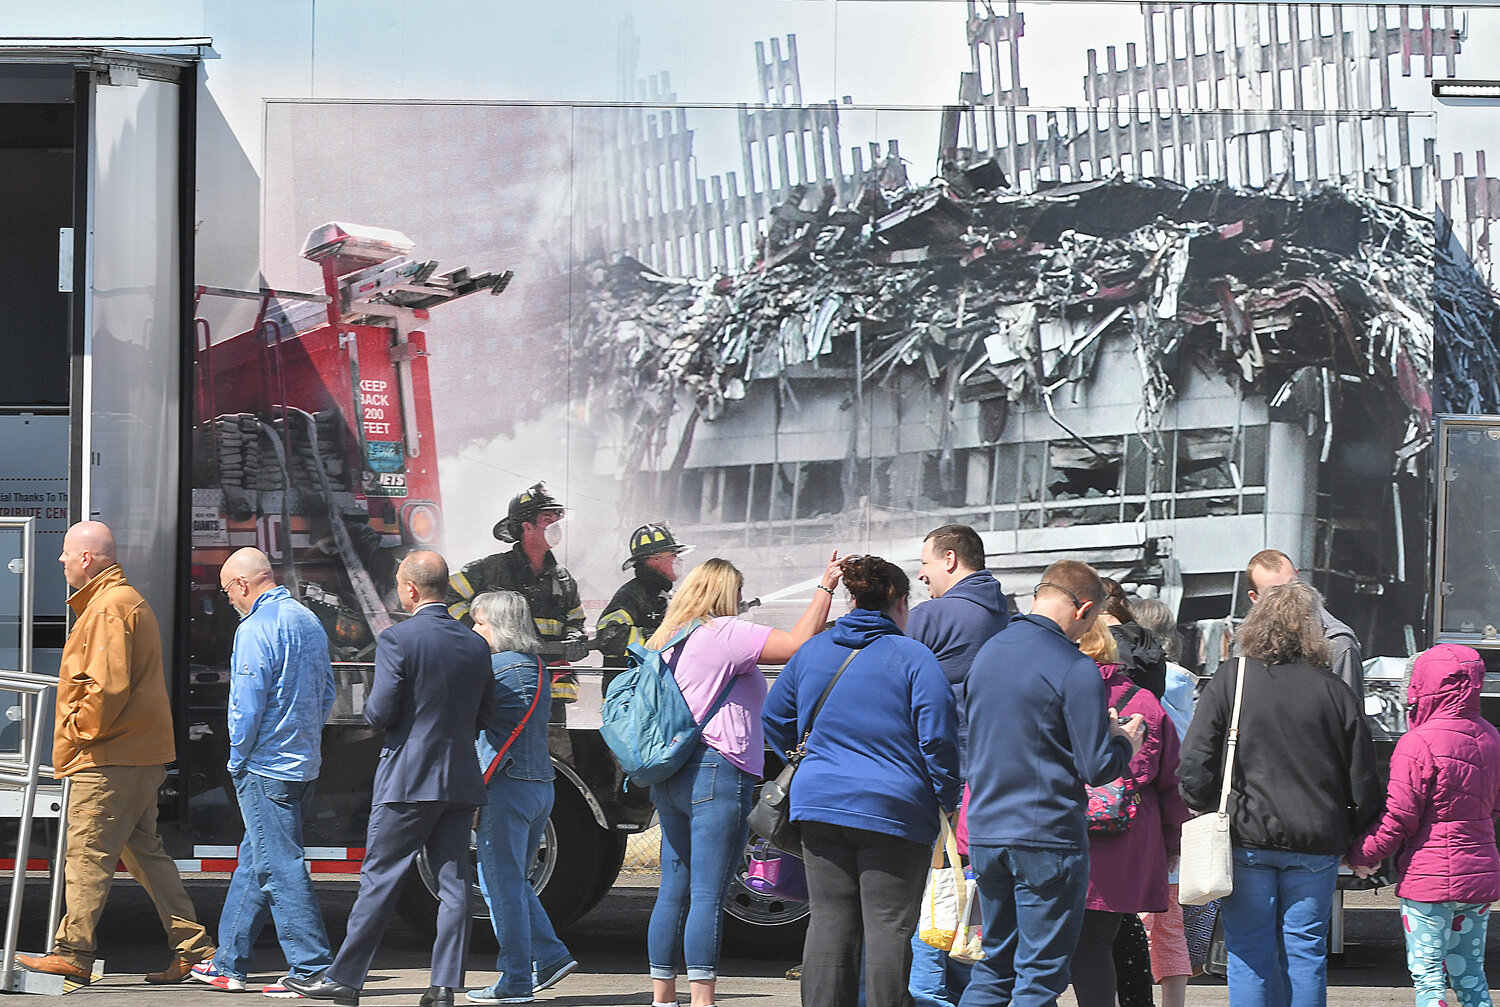 People line up to tour the Tunnel to Towers 9/11 Never Forget Mobile Exhibit at the Griffiss Technology Park. The mobile exhibit will be free and open to the public through Sunday, April 20-23 from 10 a.m. to 4 p.m. each day.